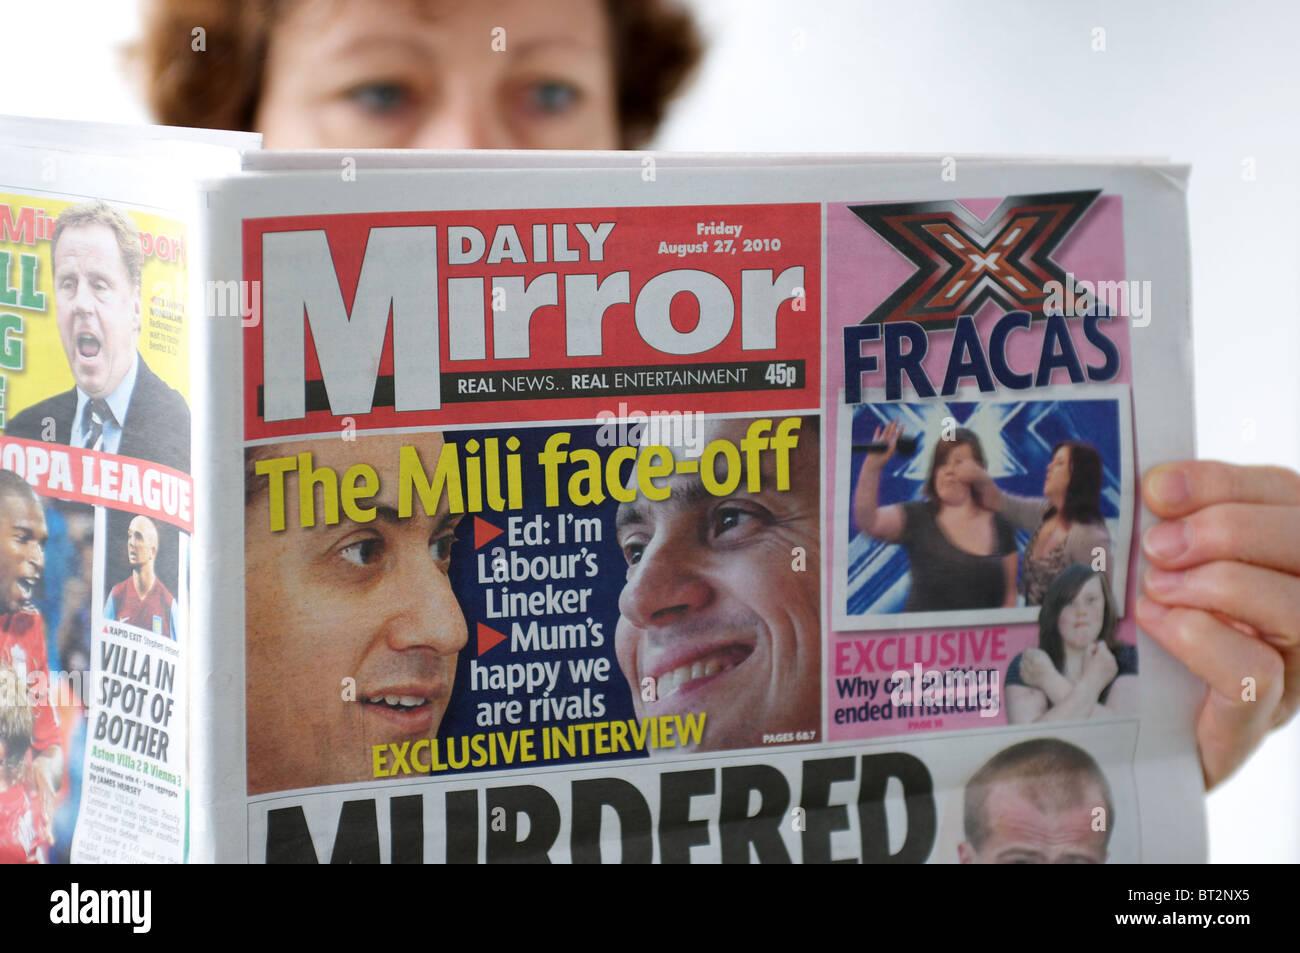 Woman reading a copy of The Daily Mirror newspaper Stock Photo - Alamy